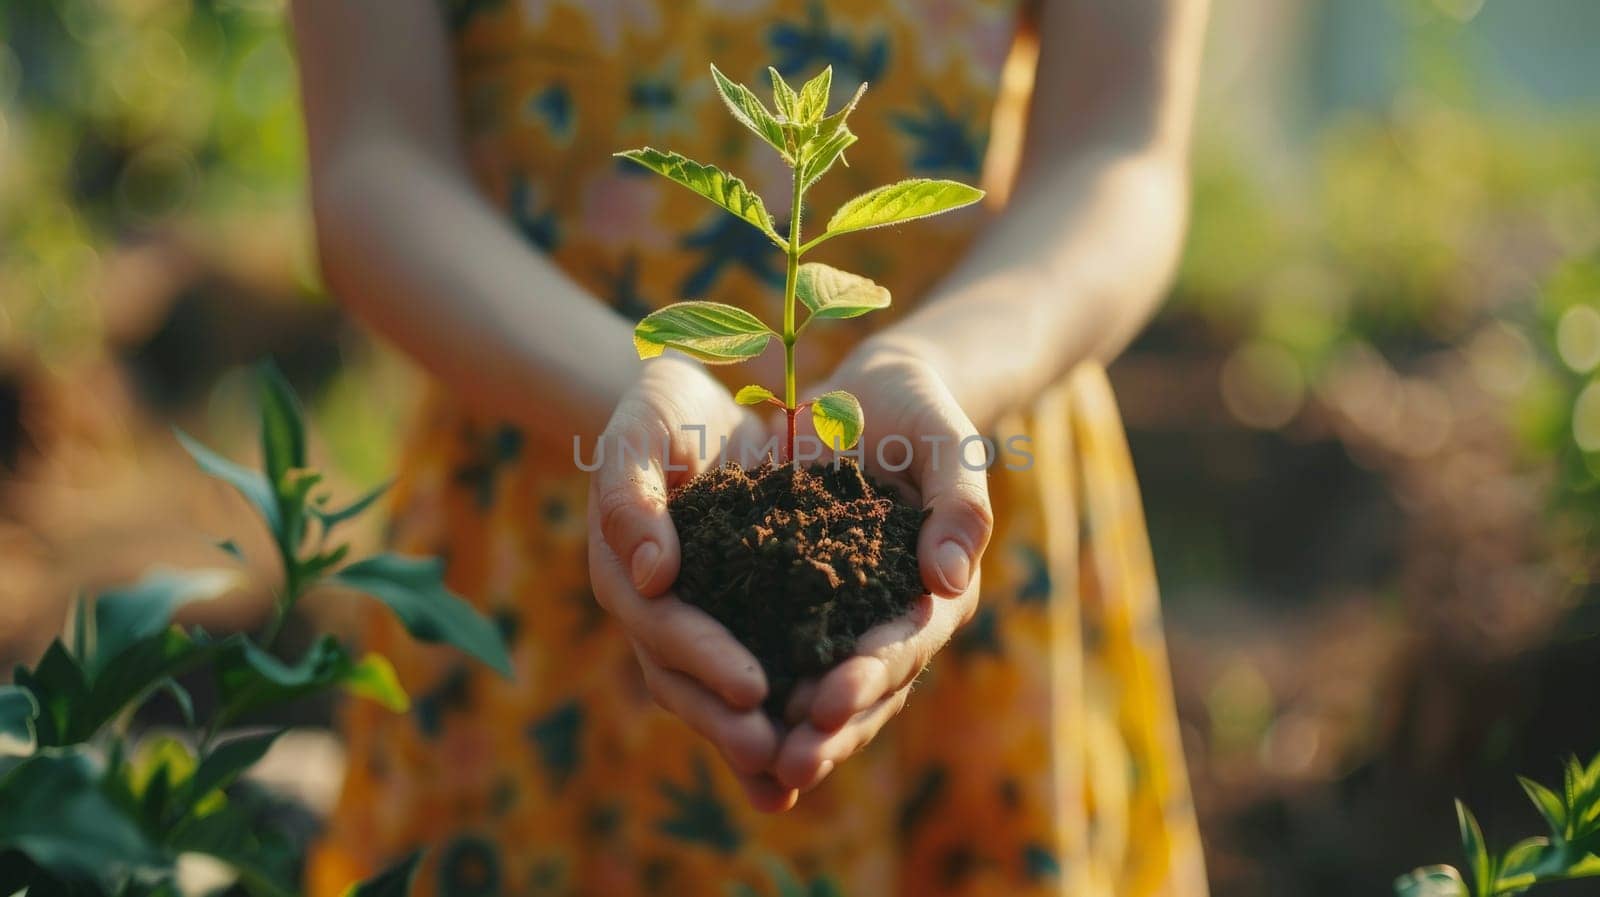 A person holding a small plant in their hands with dirt